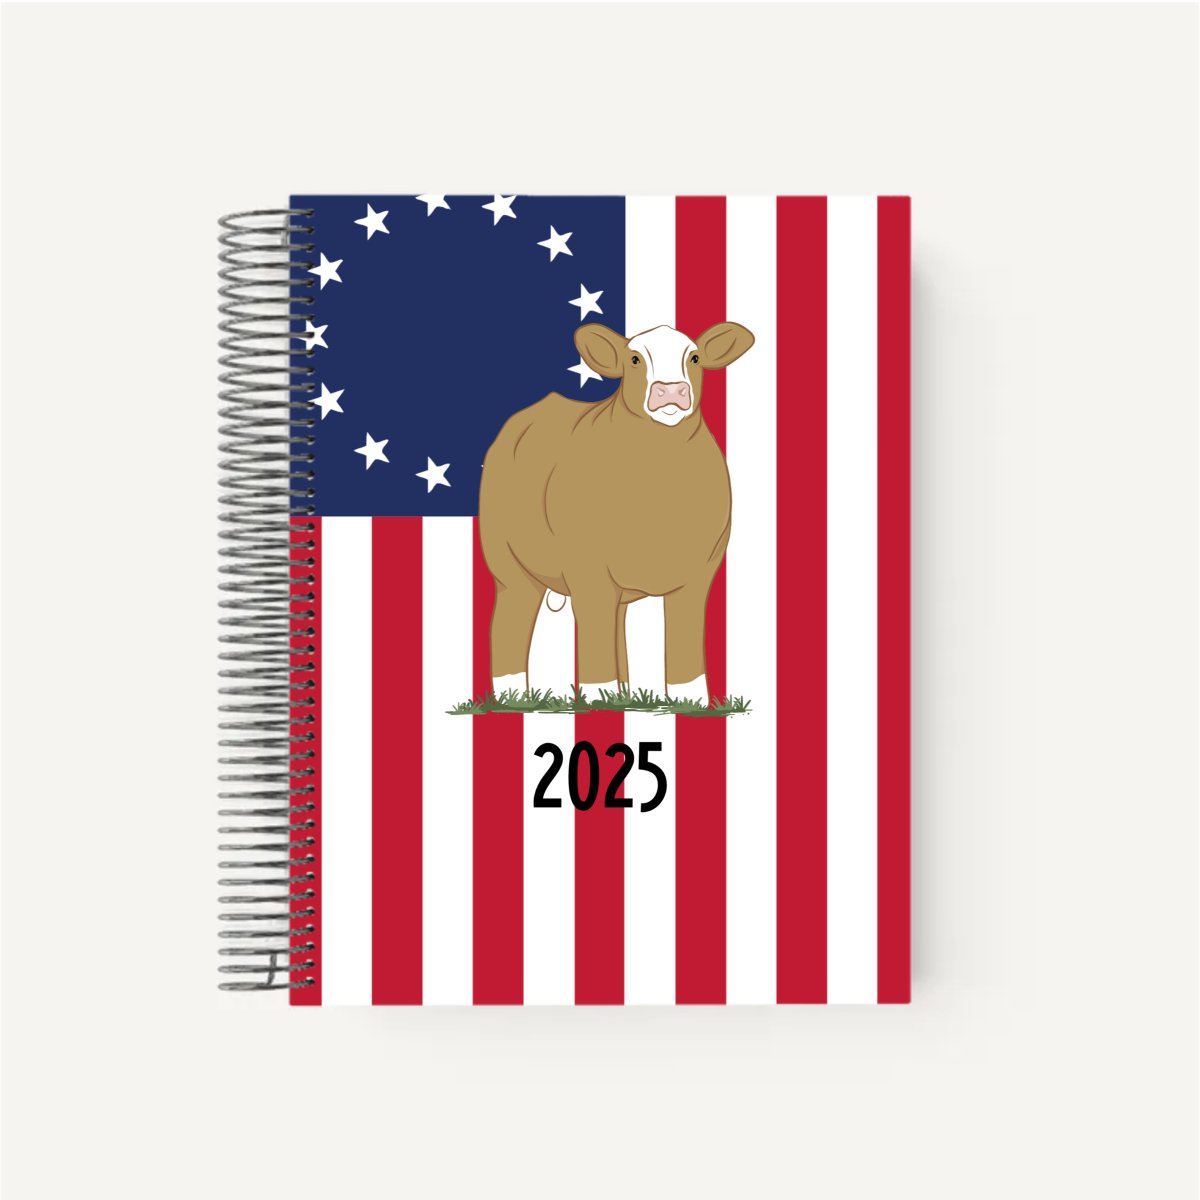 Personalized-Livestock-Animal Record Planner - Patriotic Cover